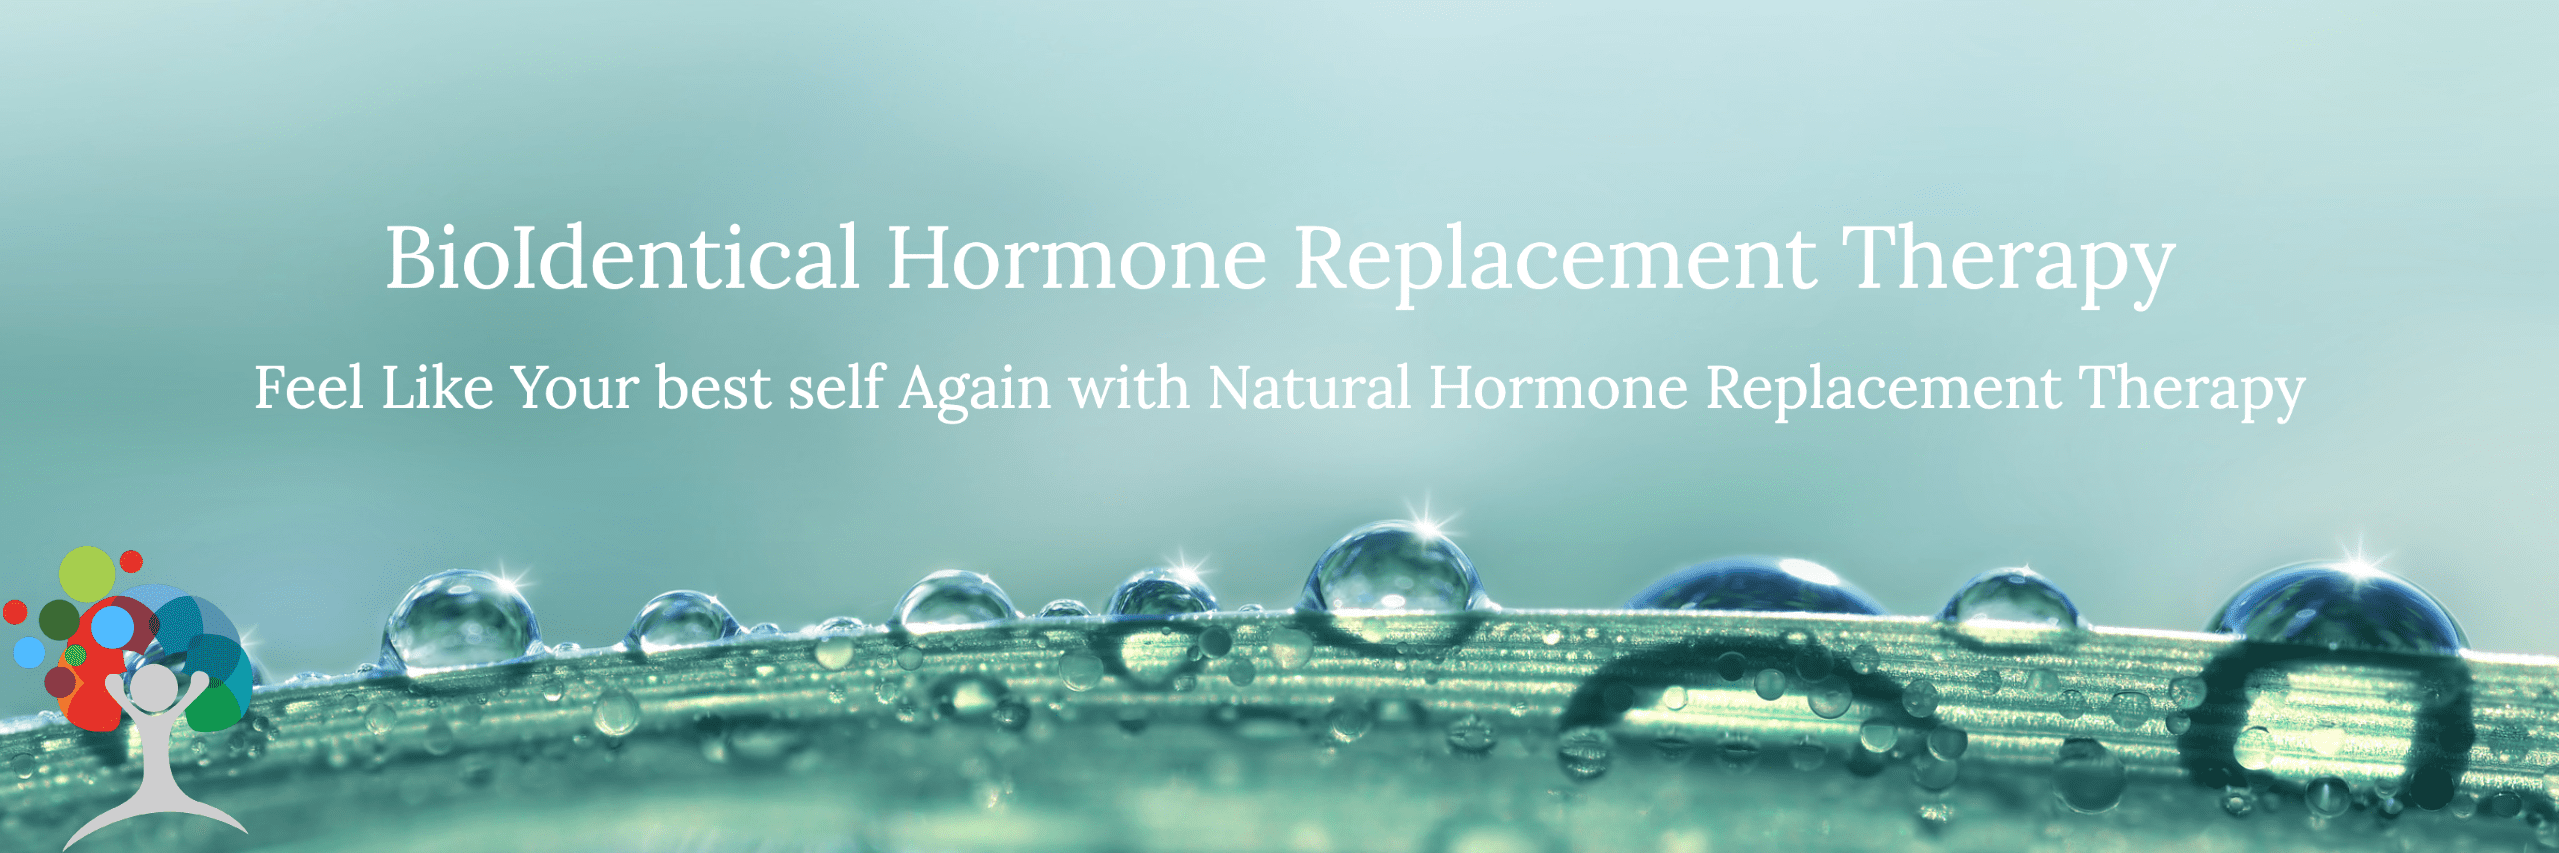 BioIdentical Hormone Replacement Therapy